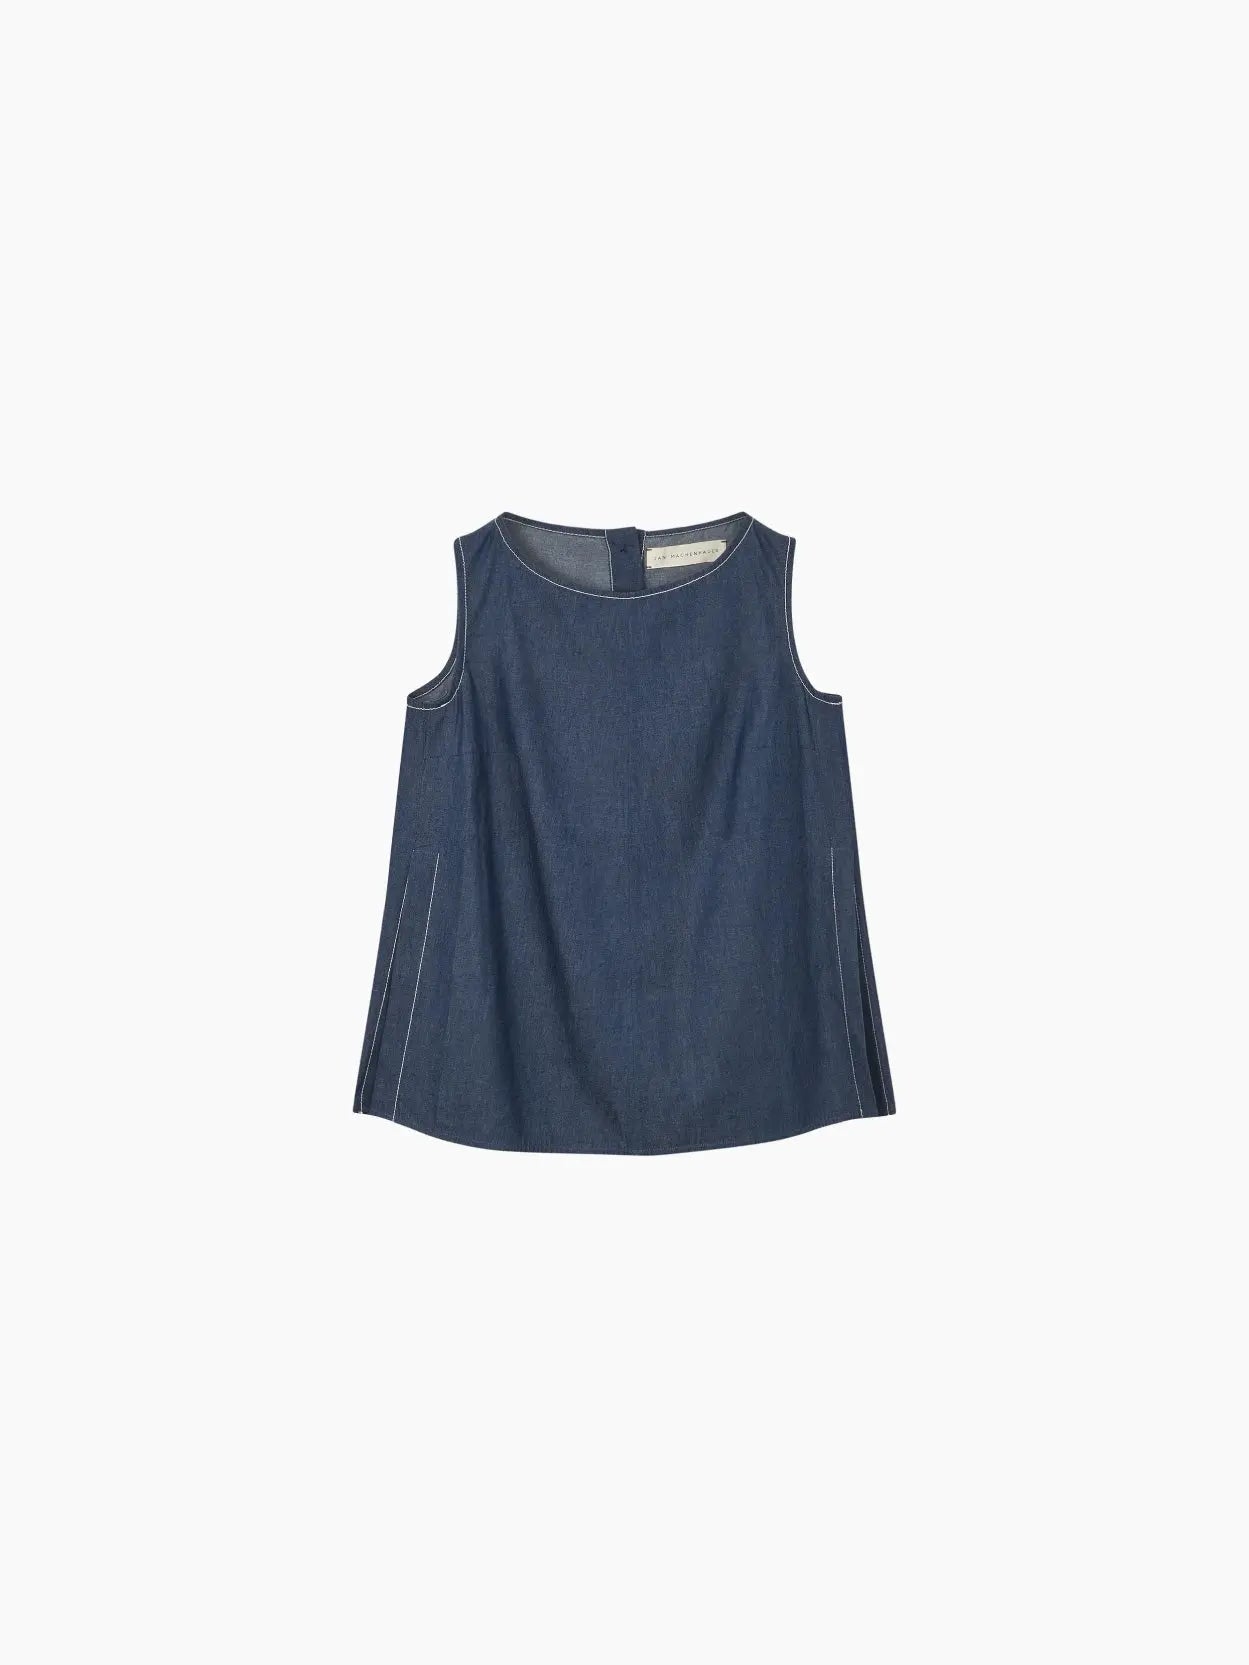 The Louise Top Denim by Jan Machenhauer is a sleeveless, A-line denim top with a rounded neckline. The top has white stitching details along the edges and sides, and a small button closure at the back of the neck. The fabric appears to be lightweight and slightly draped—perfect for your next visit to BassalStore in Barcelona.